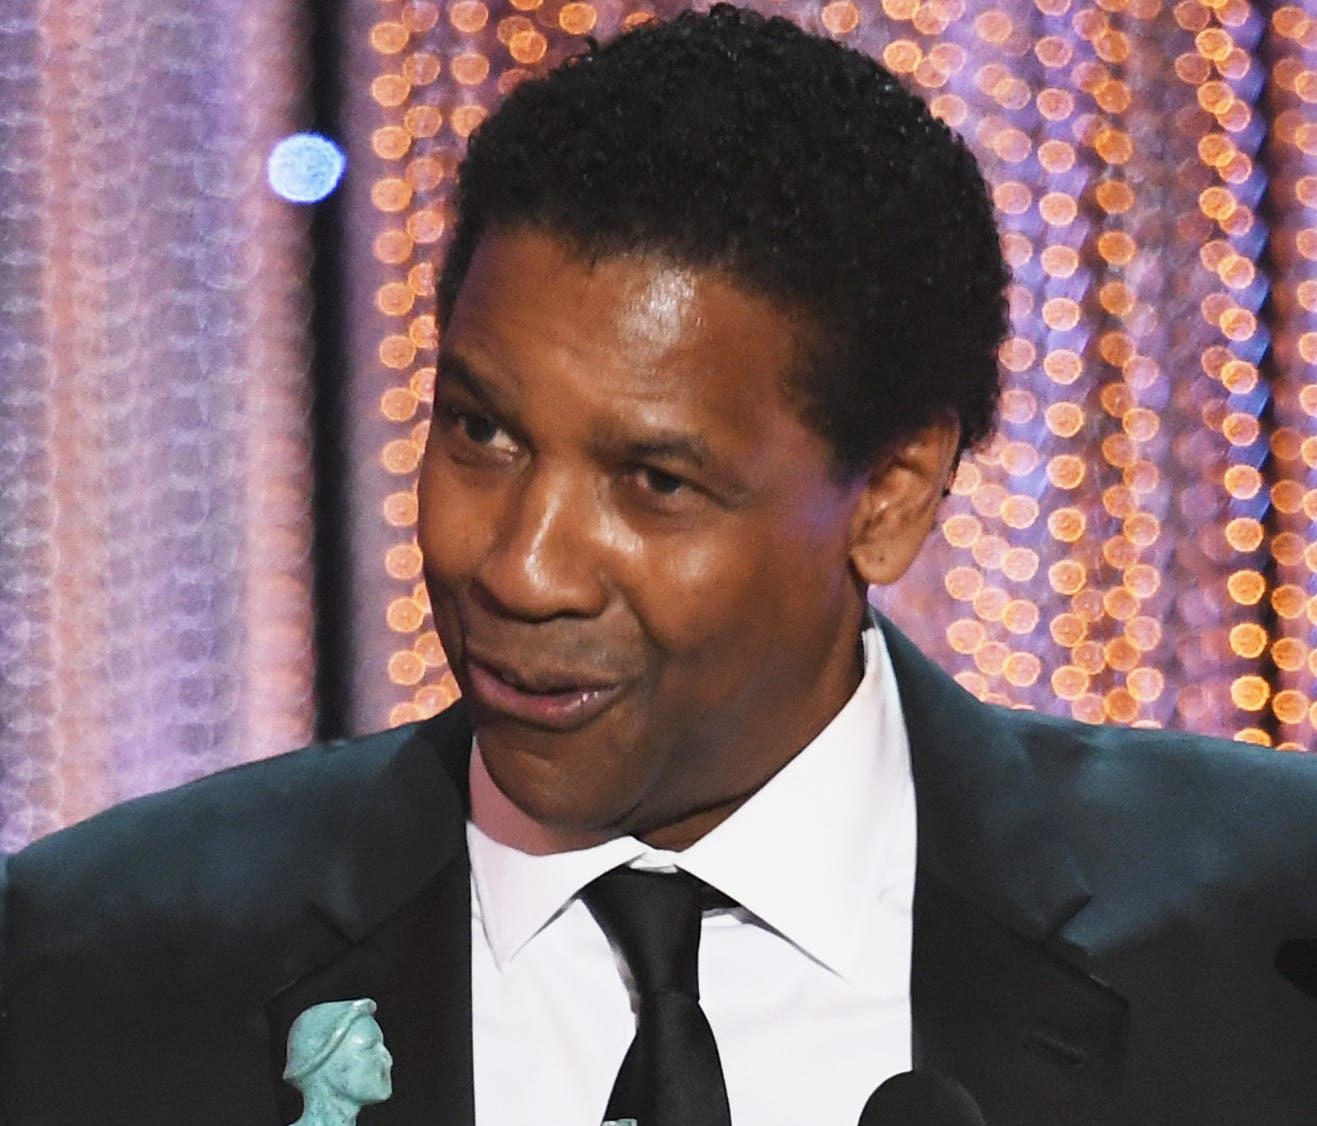 Denzel Washington accepts outstanding actor for his role in 'Fences' at Sunday's SAG Awards.